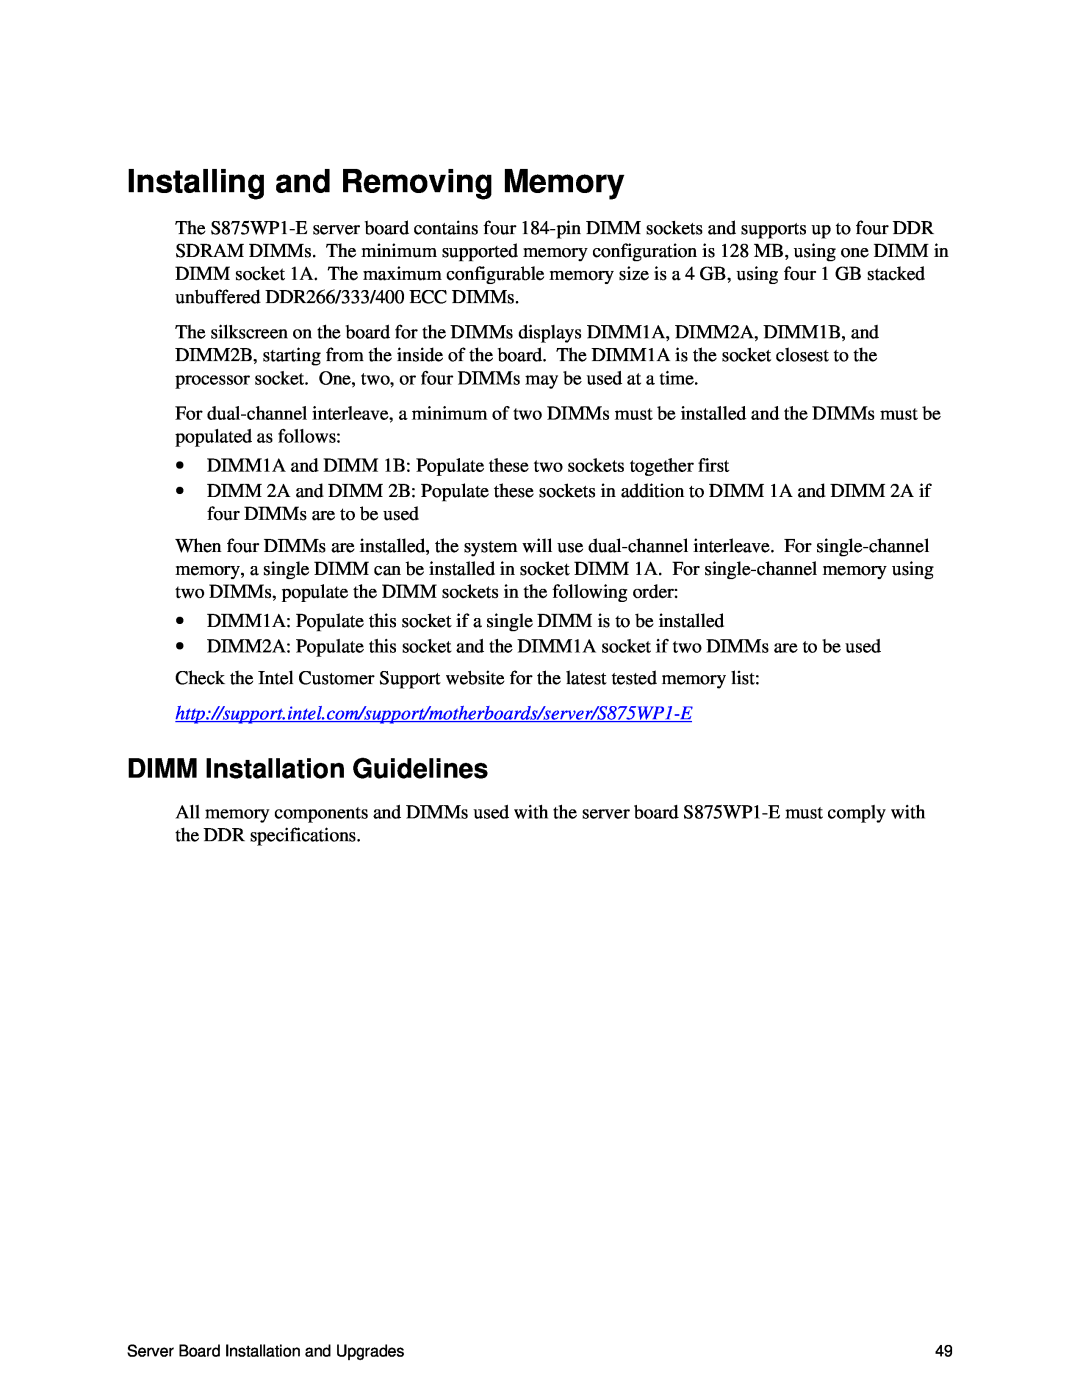 Intel S875WP1-E manual Installing and Removing Memory, DIMM Installation Guidelines 